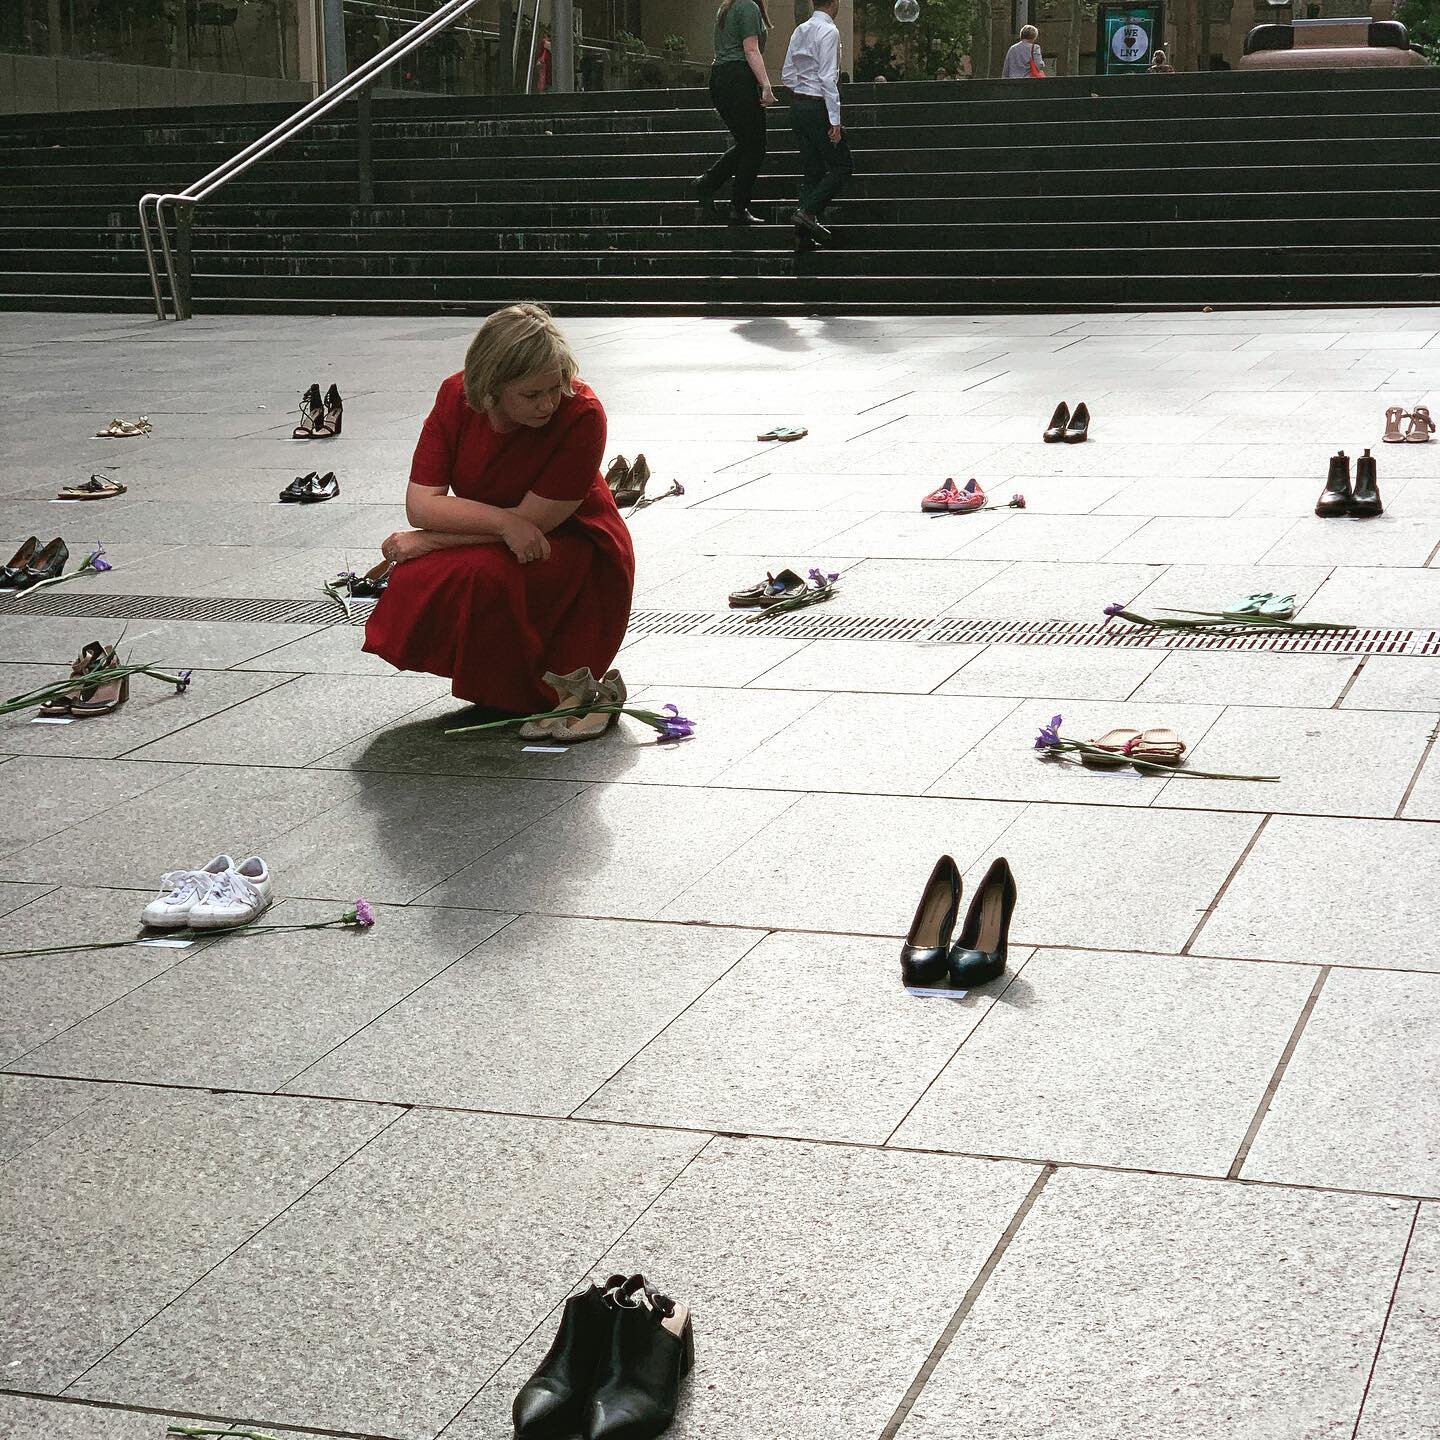 66 pairs of shoes for the 66 women killed in the last 12 months in Australia, as a result of domestic violence. Support Lou&rsquo;s Place, a day women&rsquo;s refuge in Kings Cross and so many others doing life saving work  #iwd2021 #internationalwom